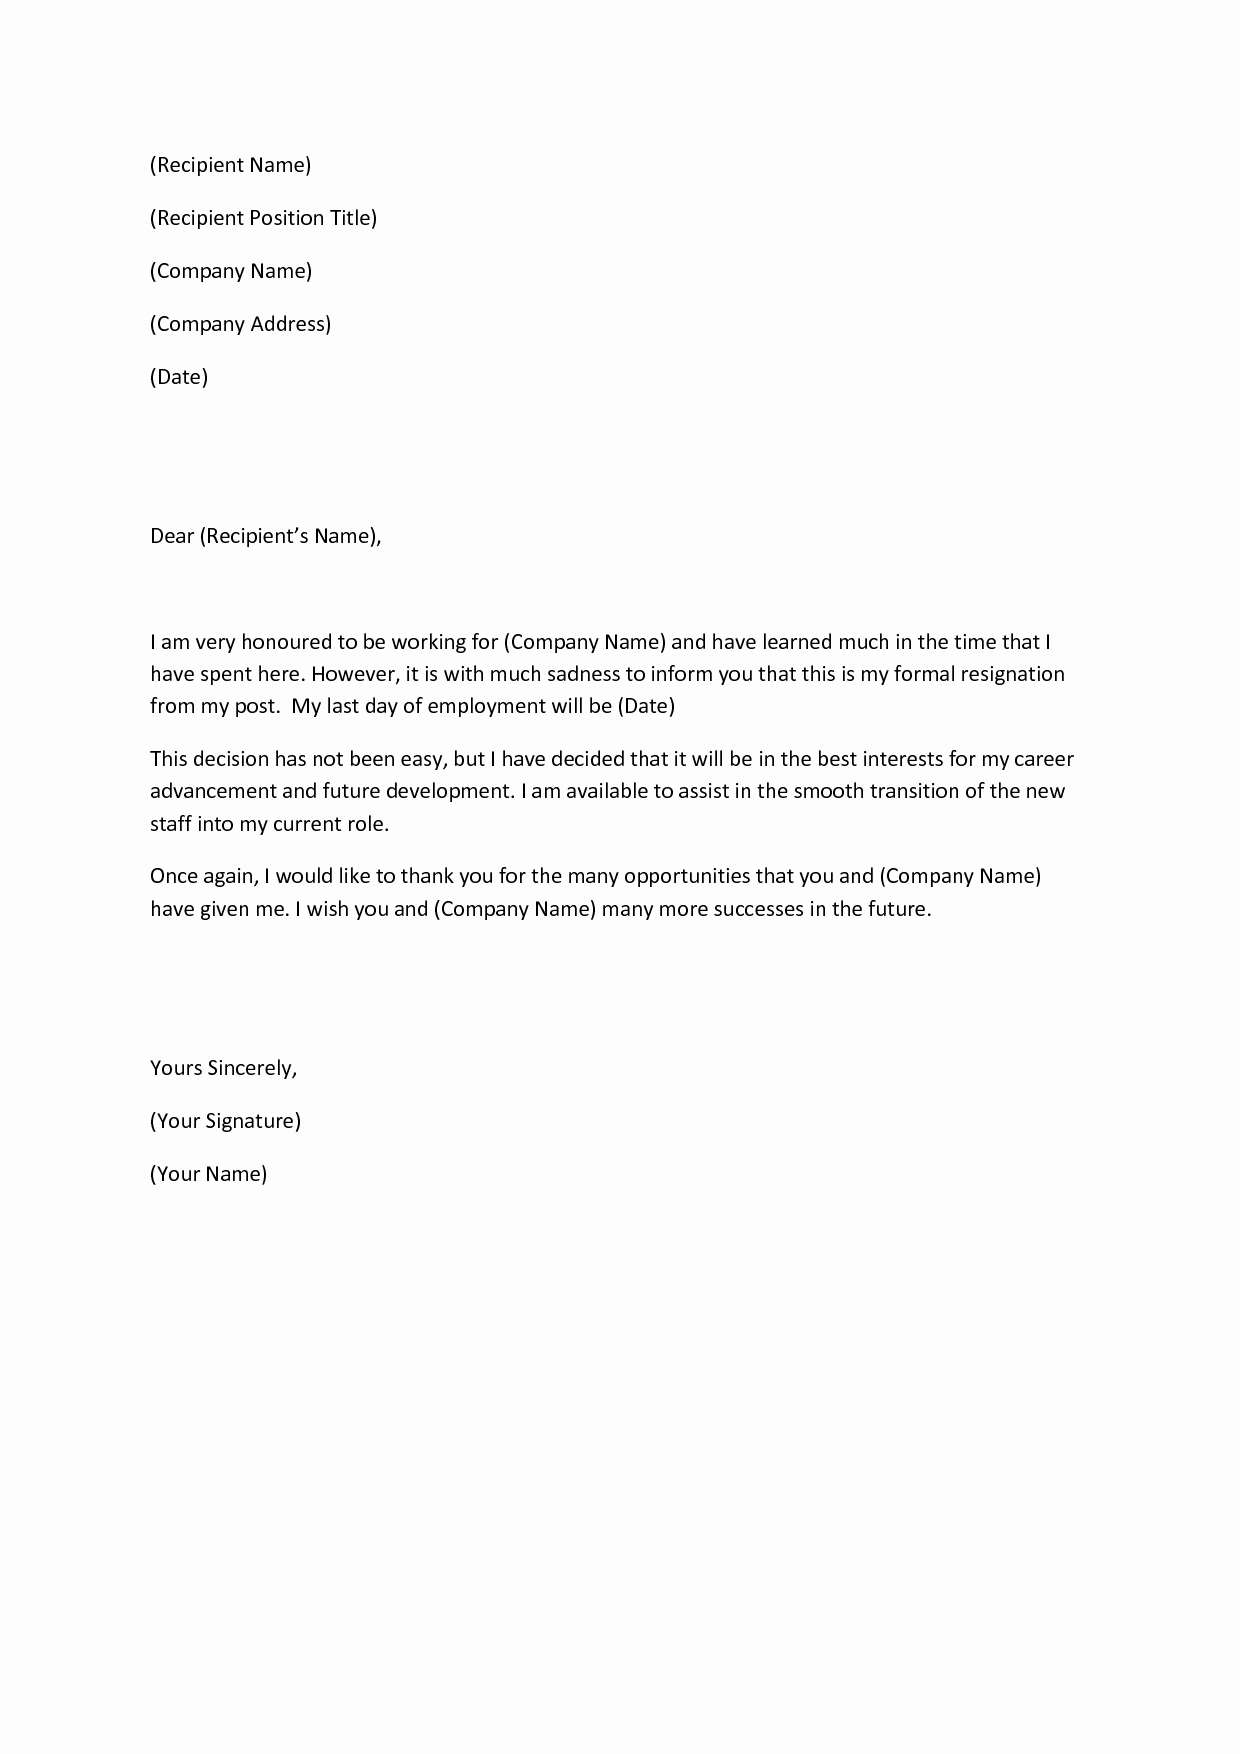 Template for Letter Of Resignation New This Article Will Include Multiple Sample Letters for